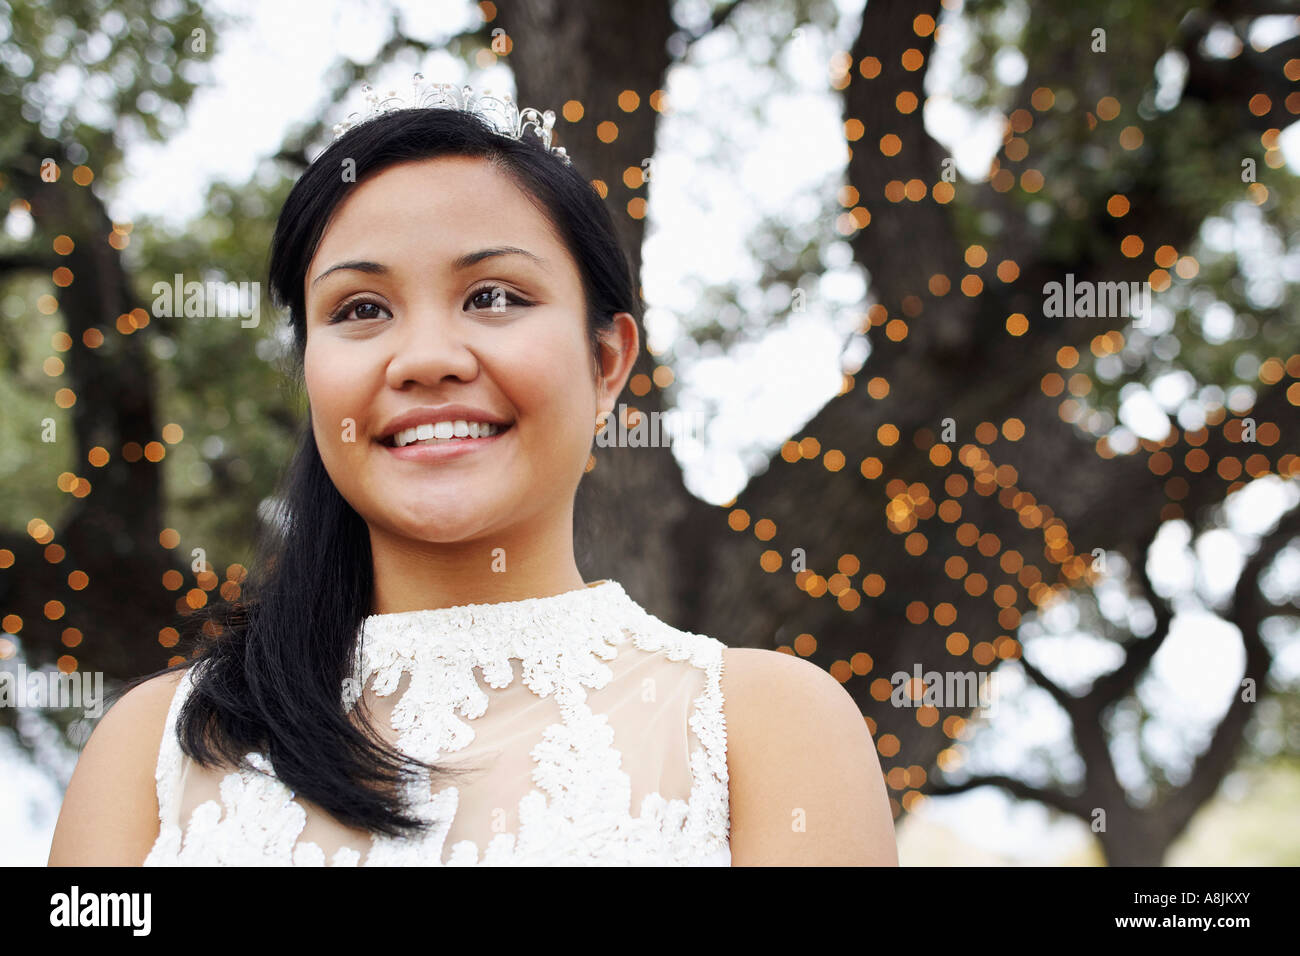 Low angle view of a bride smiling Stock Photo